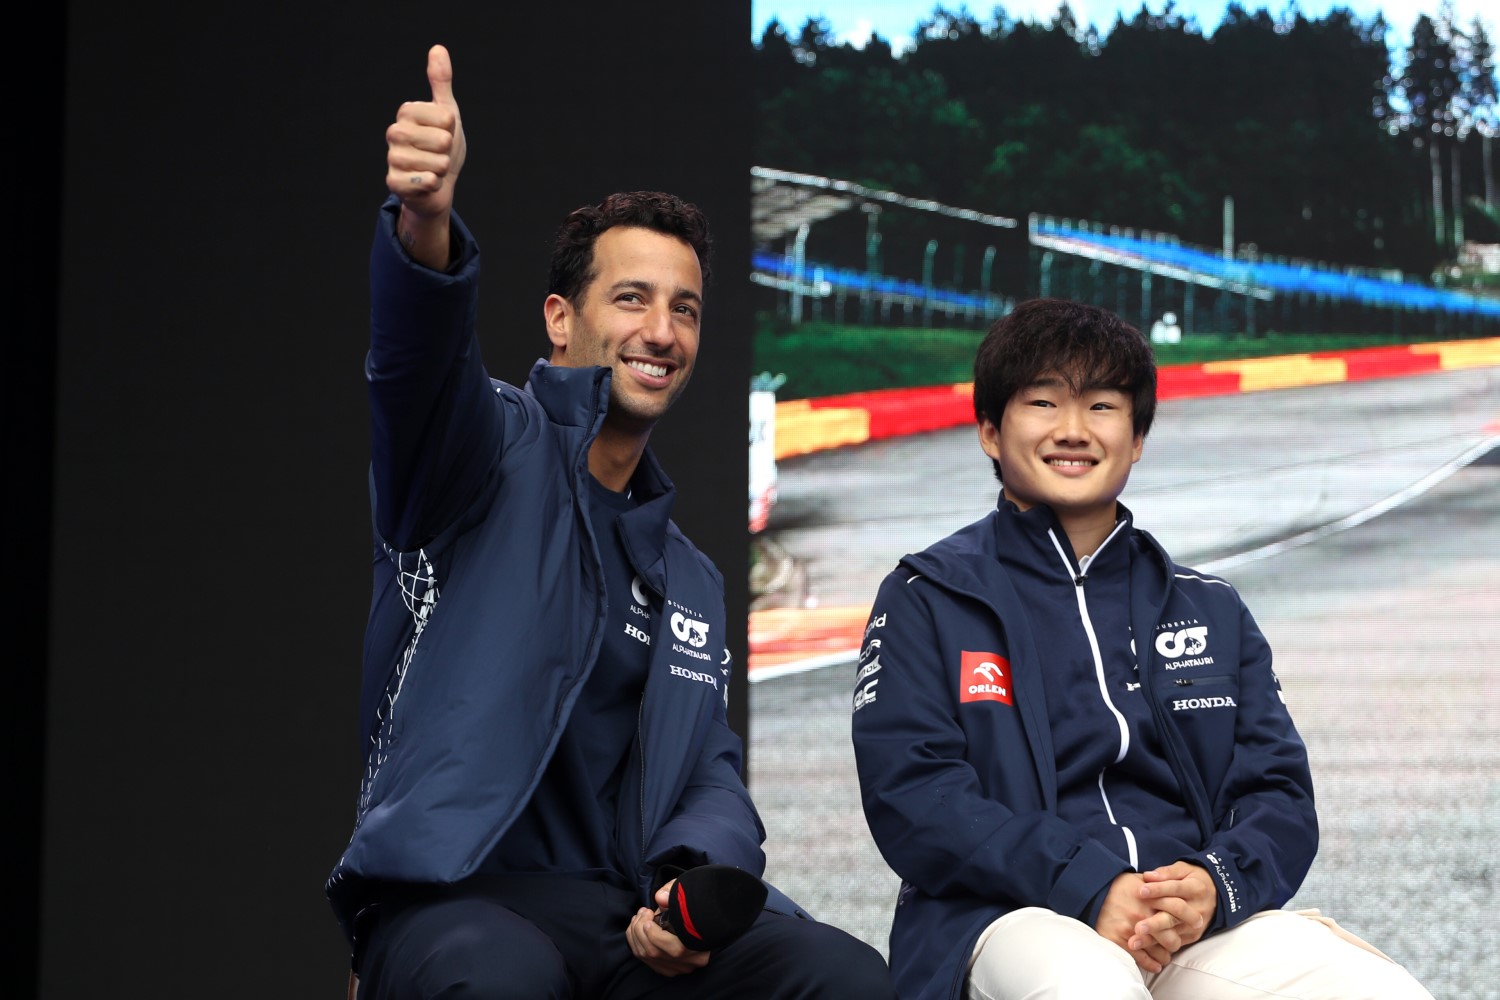 Daniel Ricciardo of Australia and Scuderia AlphaTauri and Yuki Tsunoda of Japan and Scuderia AlphaTauri talk to the crowd on the fan stage prior to practice ahead of the F1 Grand Prix of Belgium at Circuit de Spa-Francorchamps on July 28, 2023 in Spa, Belgium. (Photo by Peter Fox/Getty Images) // Getty Images / Red Bull Content Pool